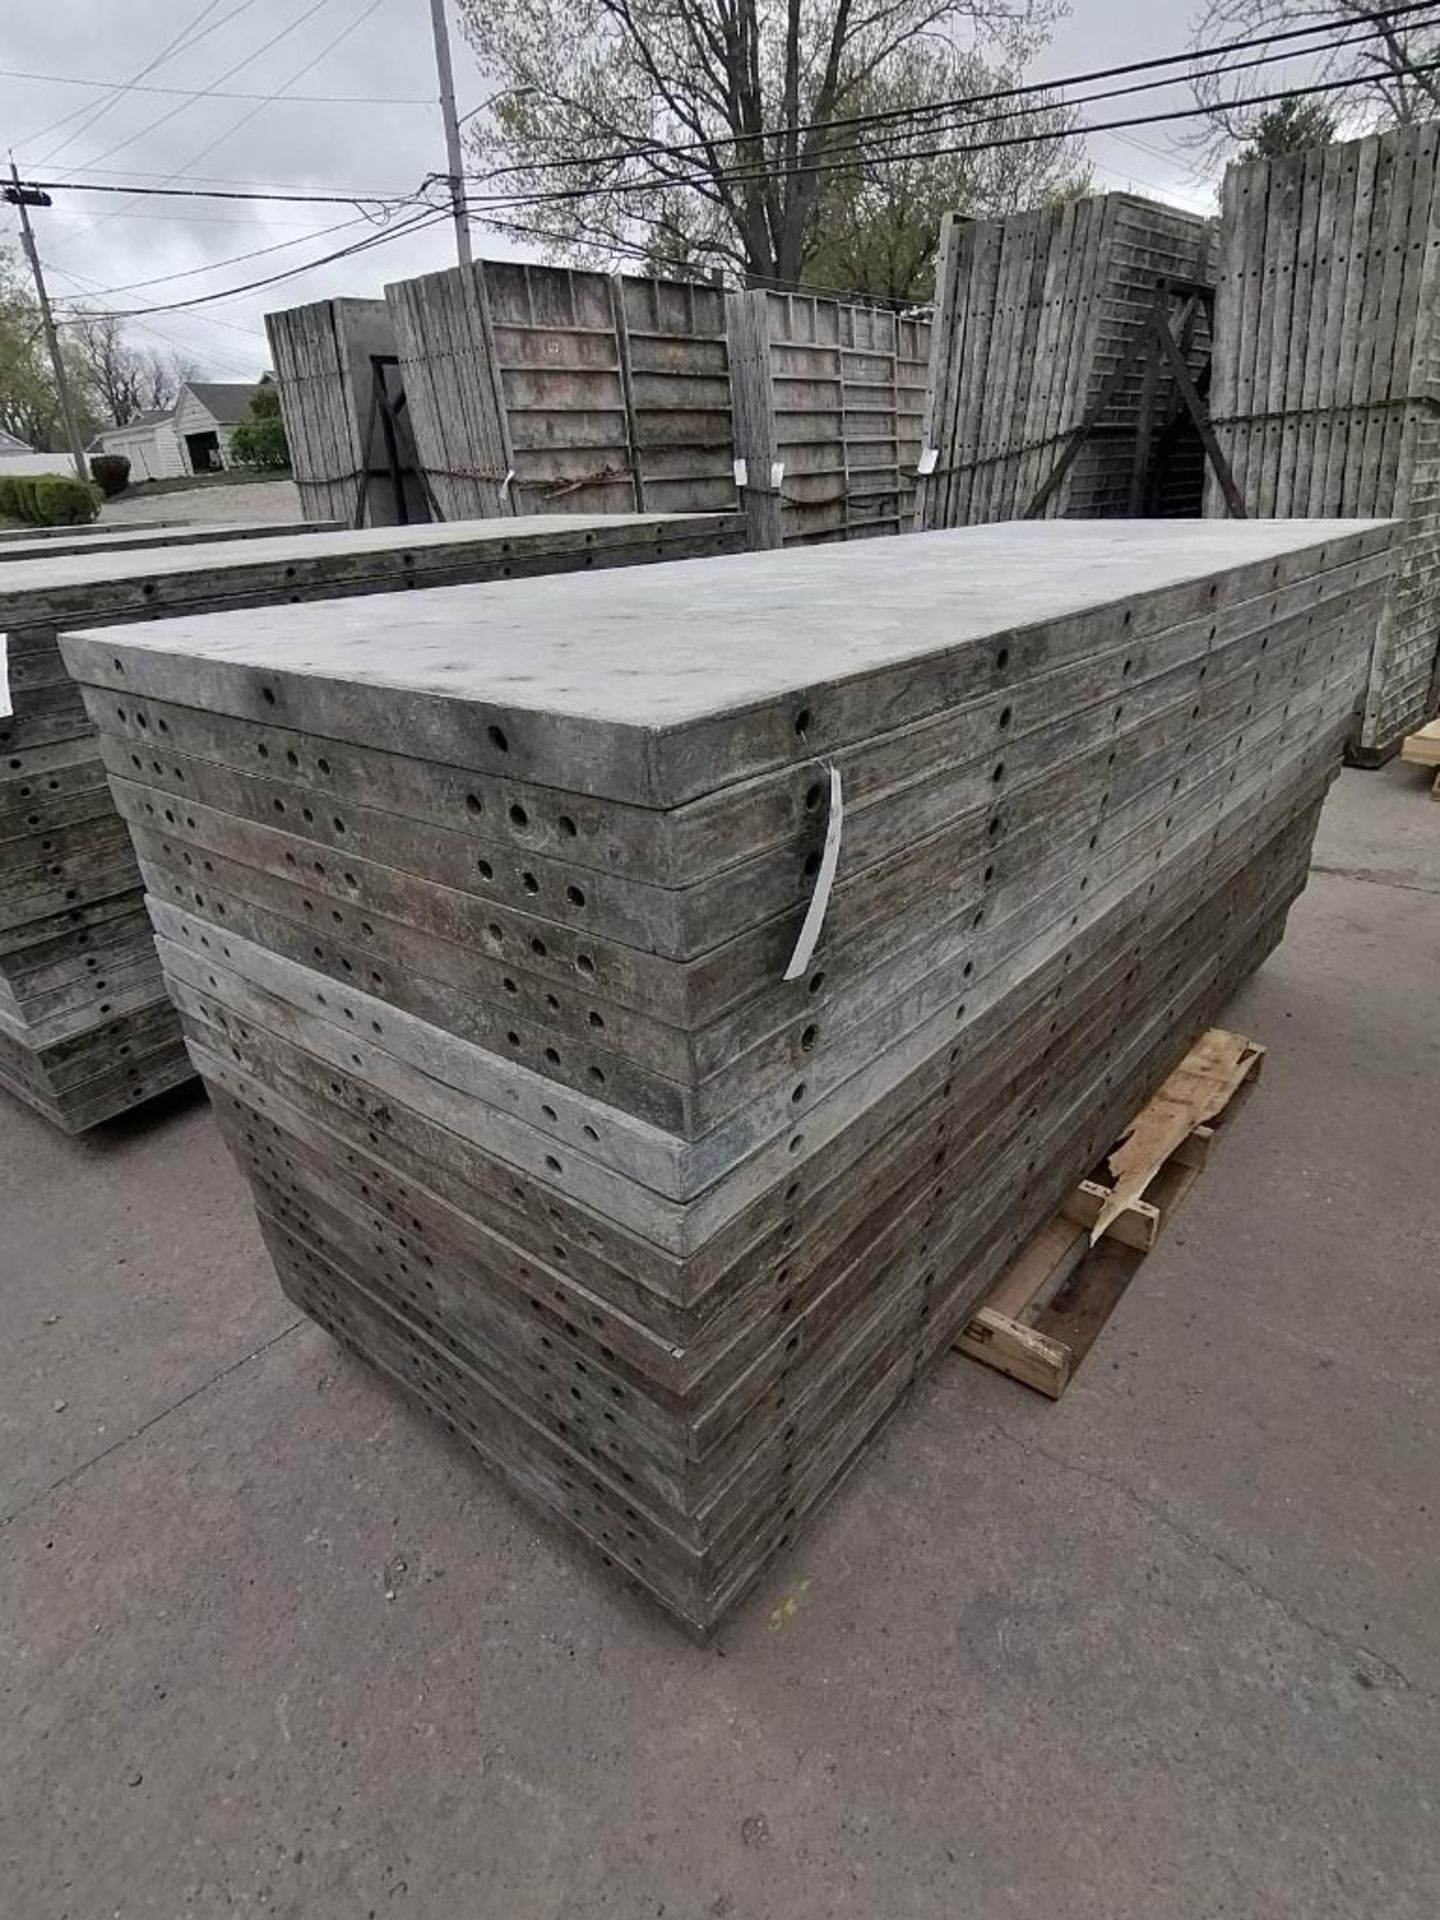 (20) 3' x 8' Wall-Ties Smooth Aluminum Concrete Forms 6-12 Hole Pattern. Located in Mt. Pleasant, - Image 5 of 10